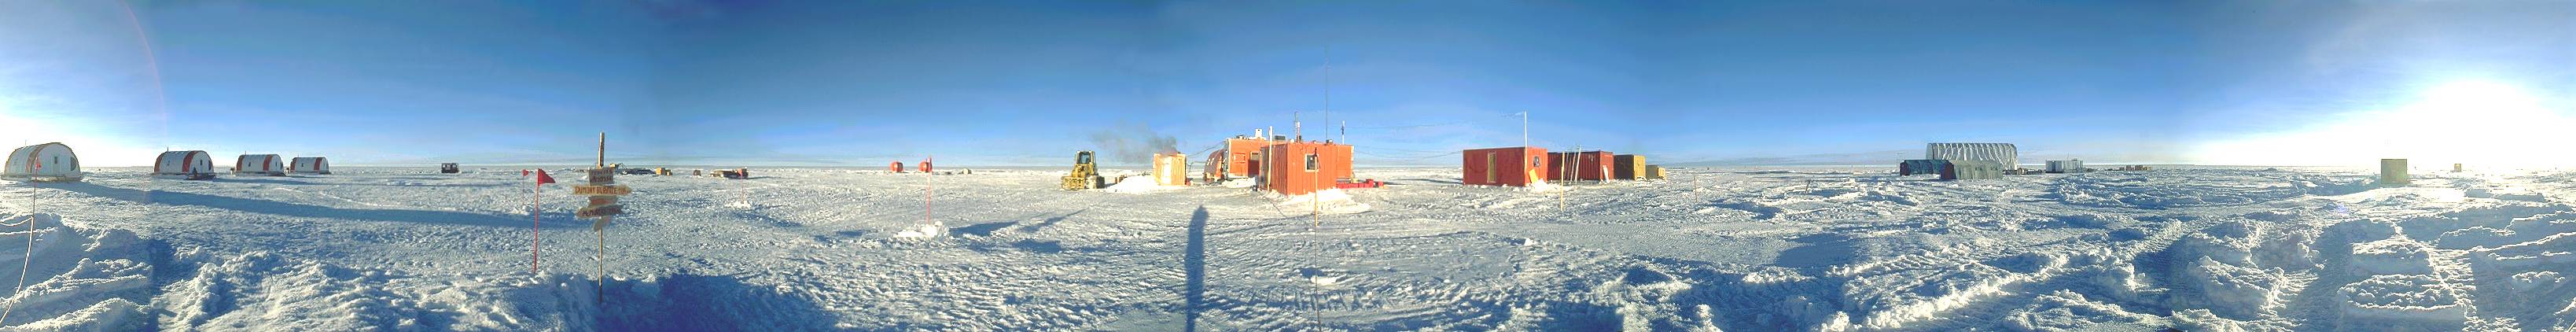 [PanoDCcenter.jpg]
360° panorama of DomeC taken from the center of the station in January, before the arrival of the traverse.